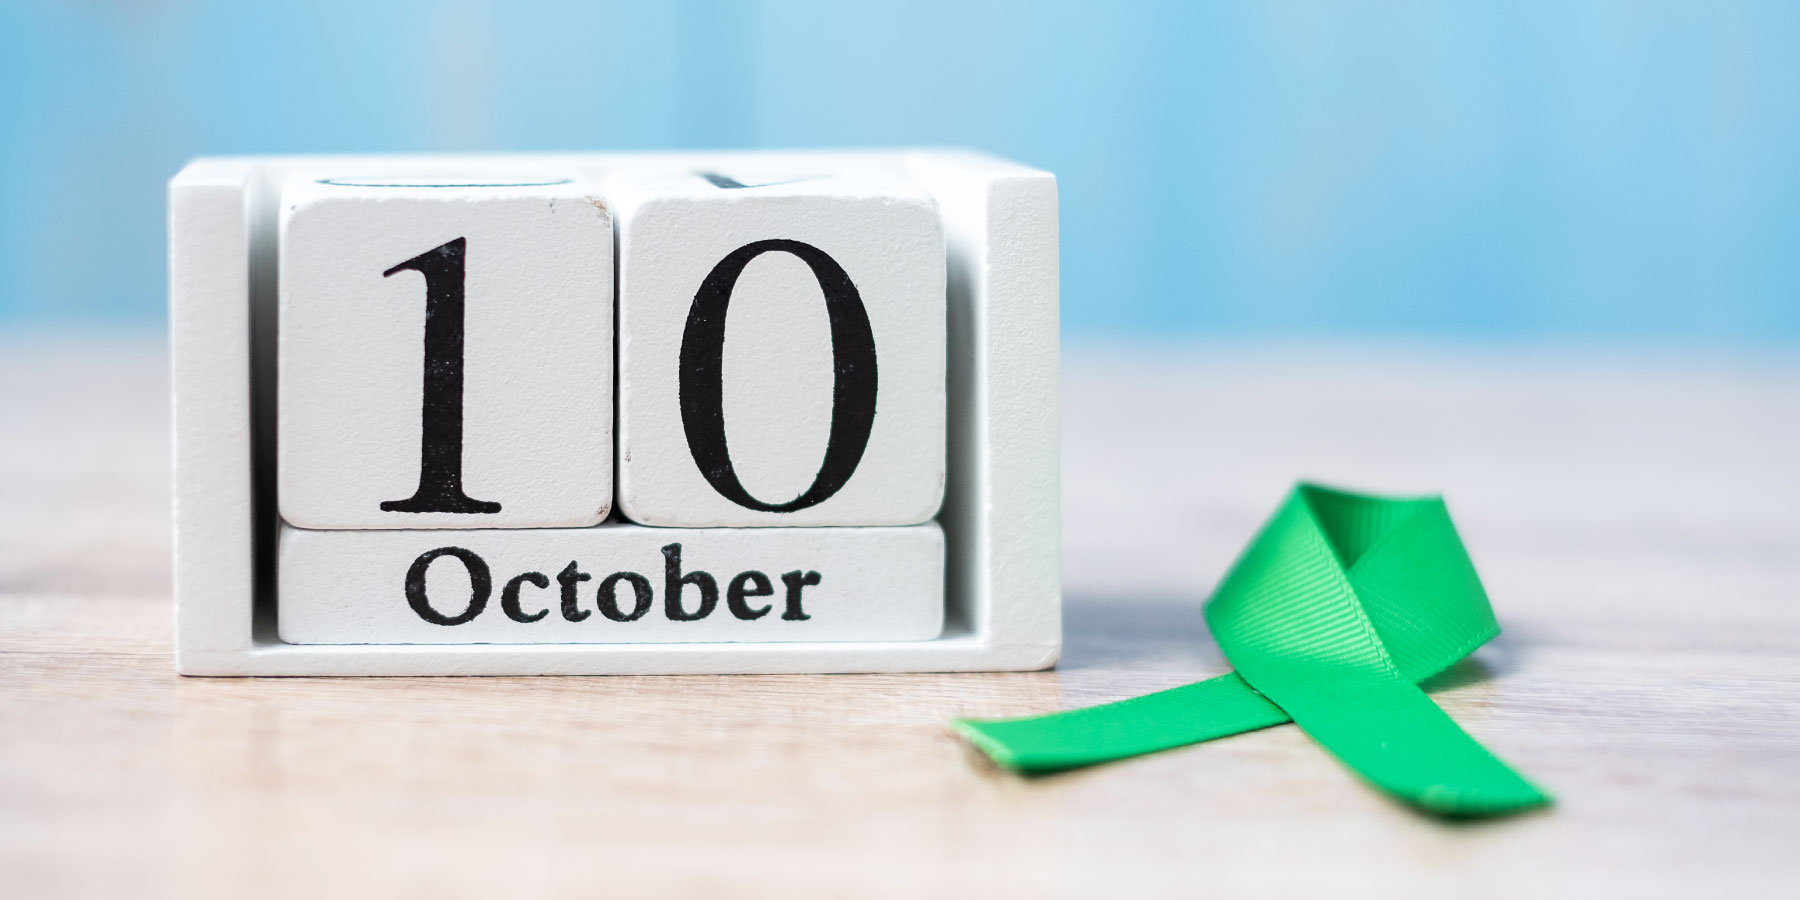 Alphabee World Health Day - Blocks spelling out October 10 with Green ribbon next to it